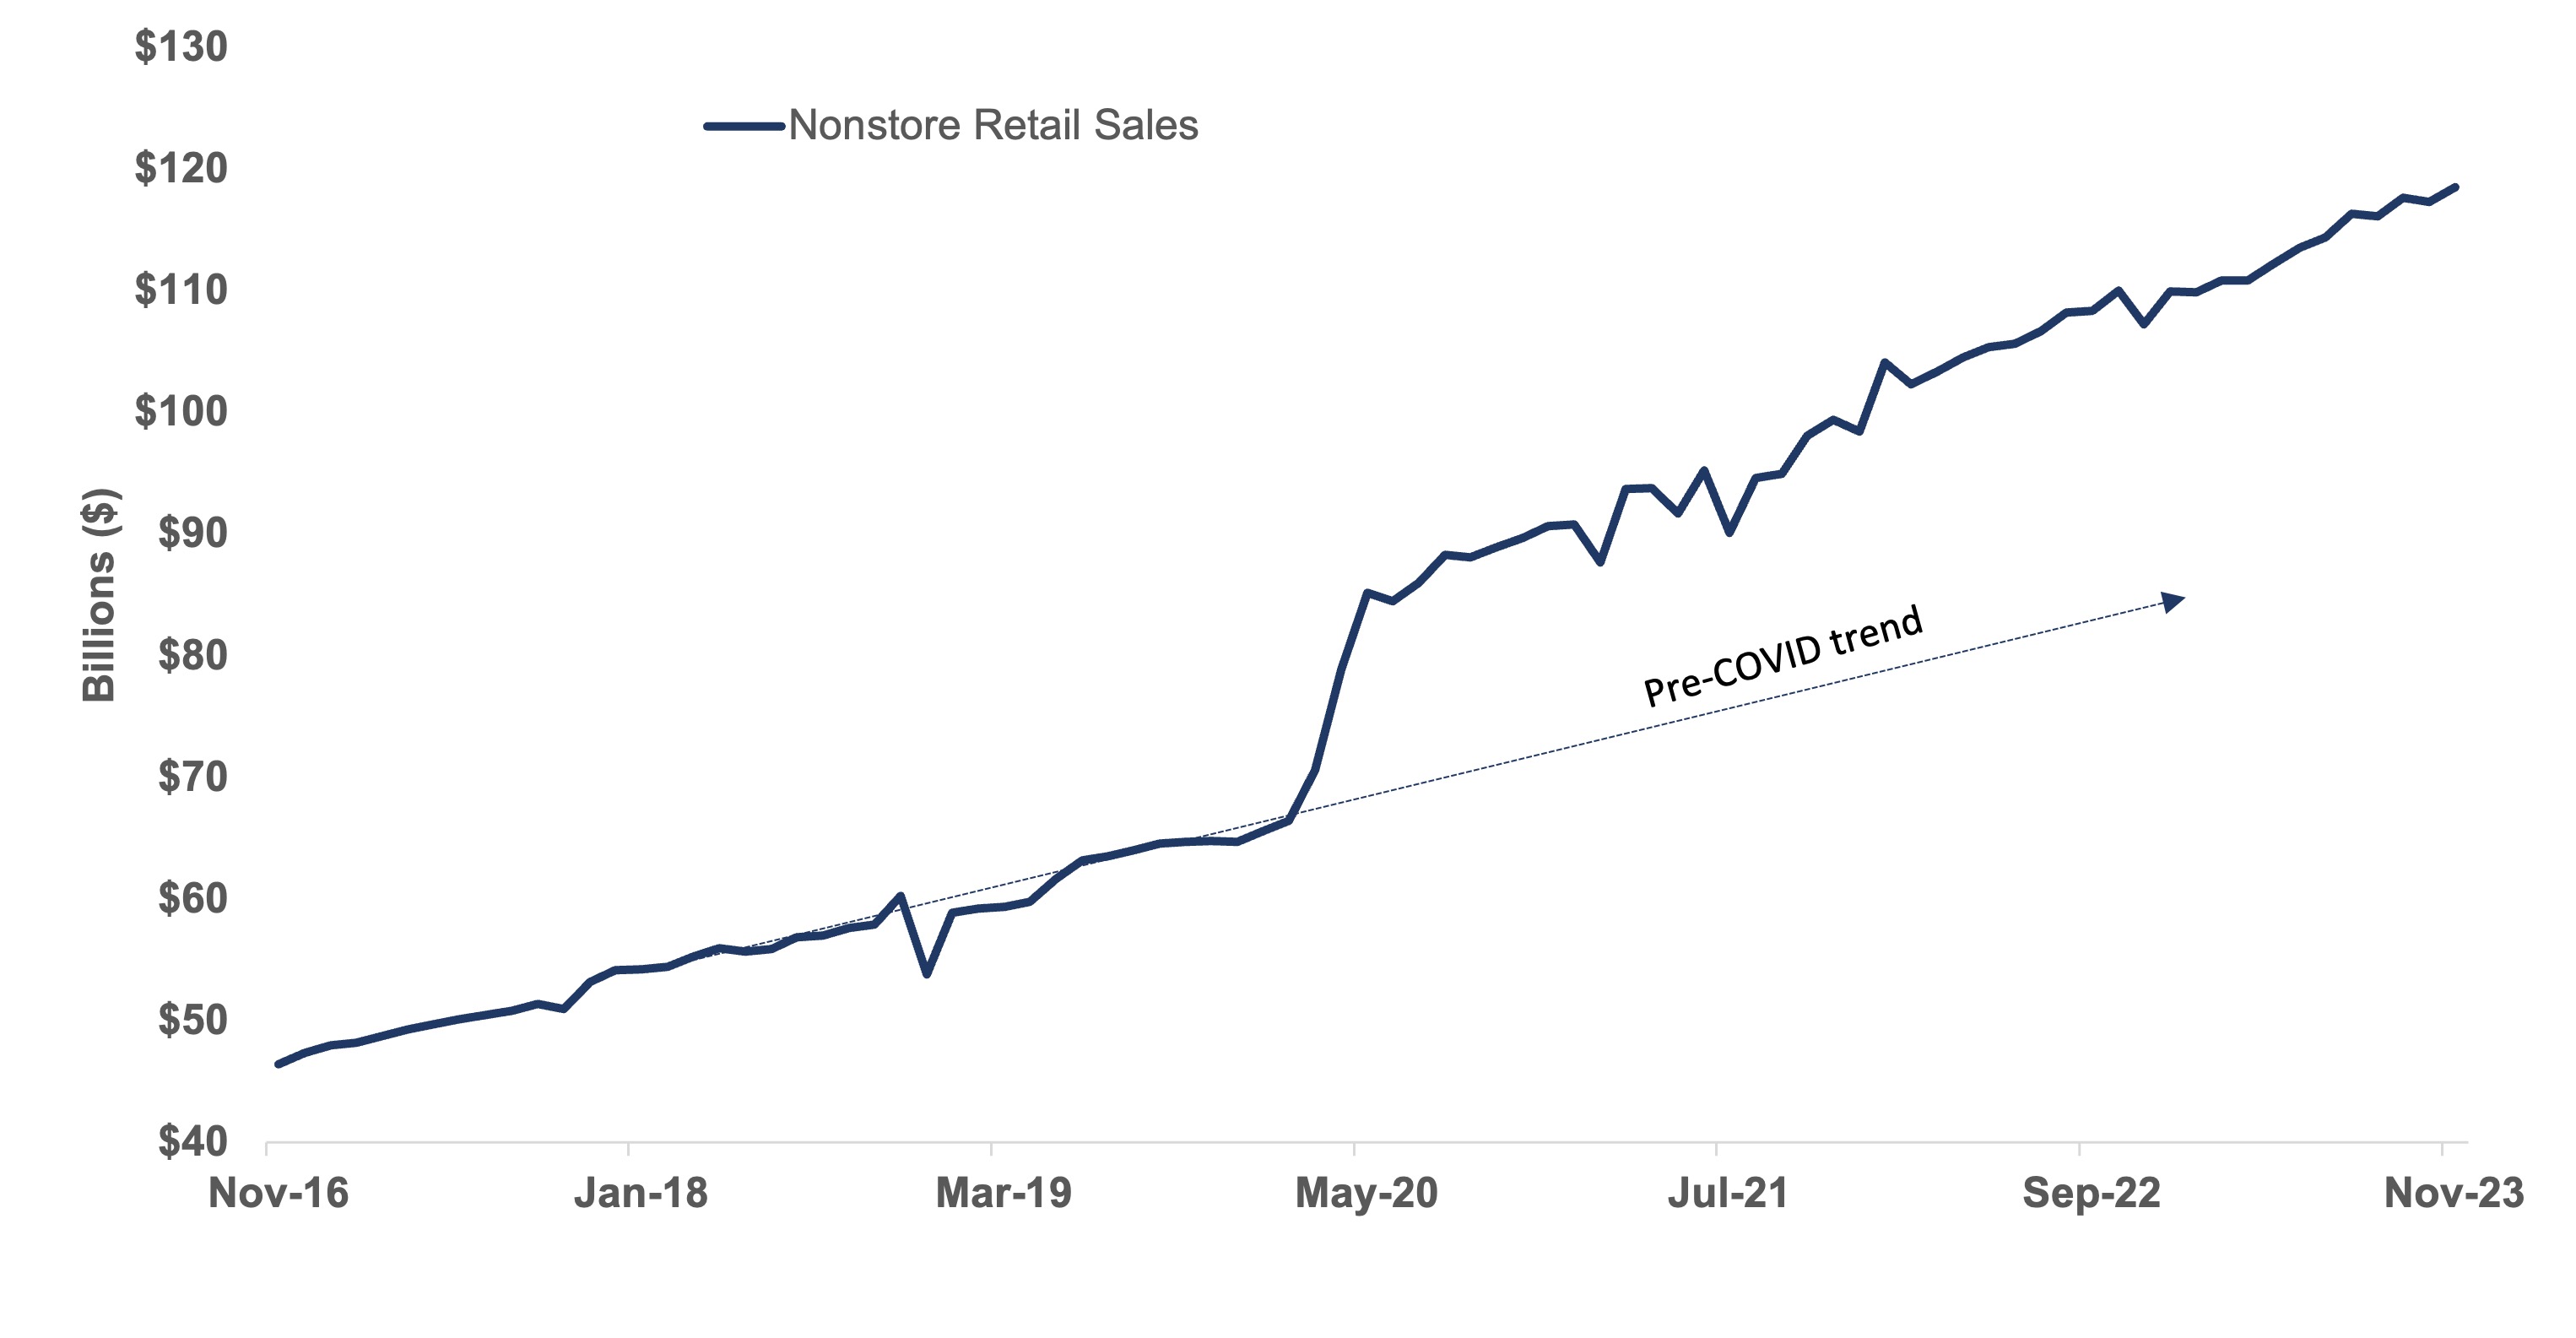 Line graph depicting nonstore retail sales from November 2016 to November 2023 found the shift to online sales is sticking, in billions of dollars.